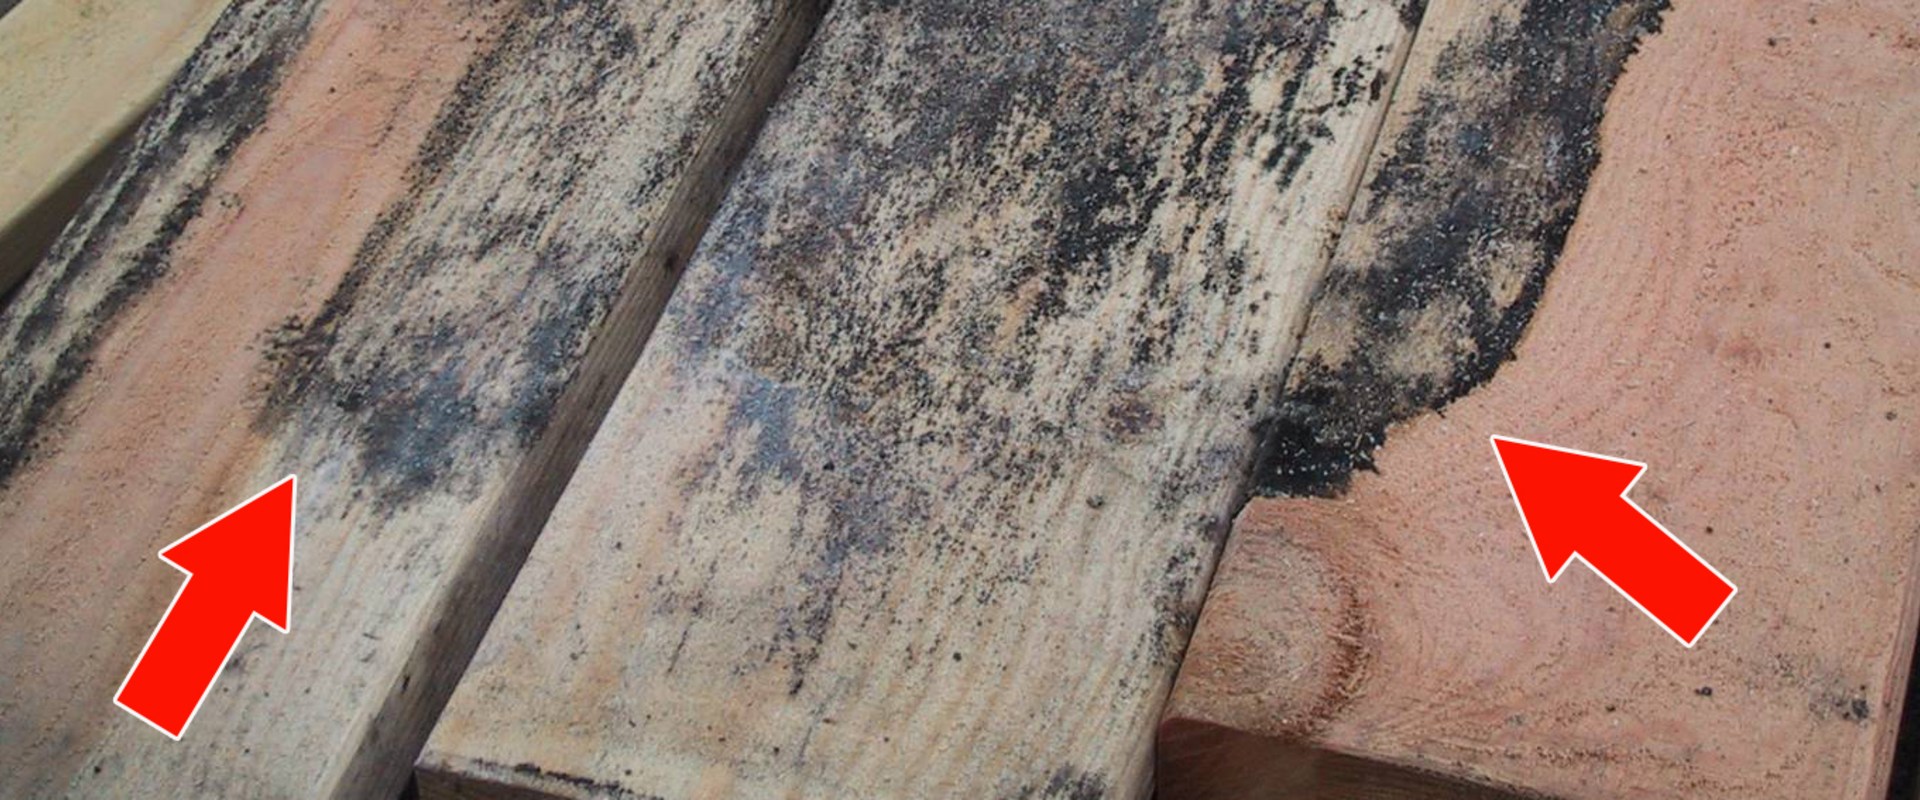 Can water damaged wood be saved?